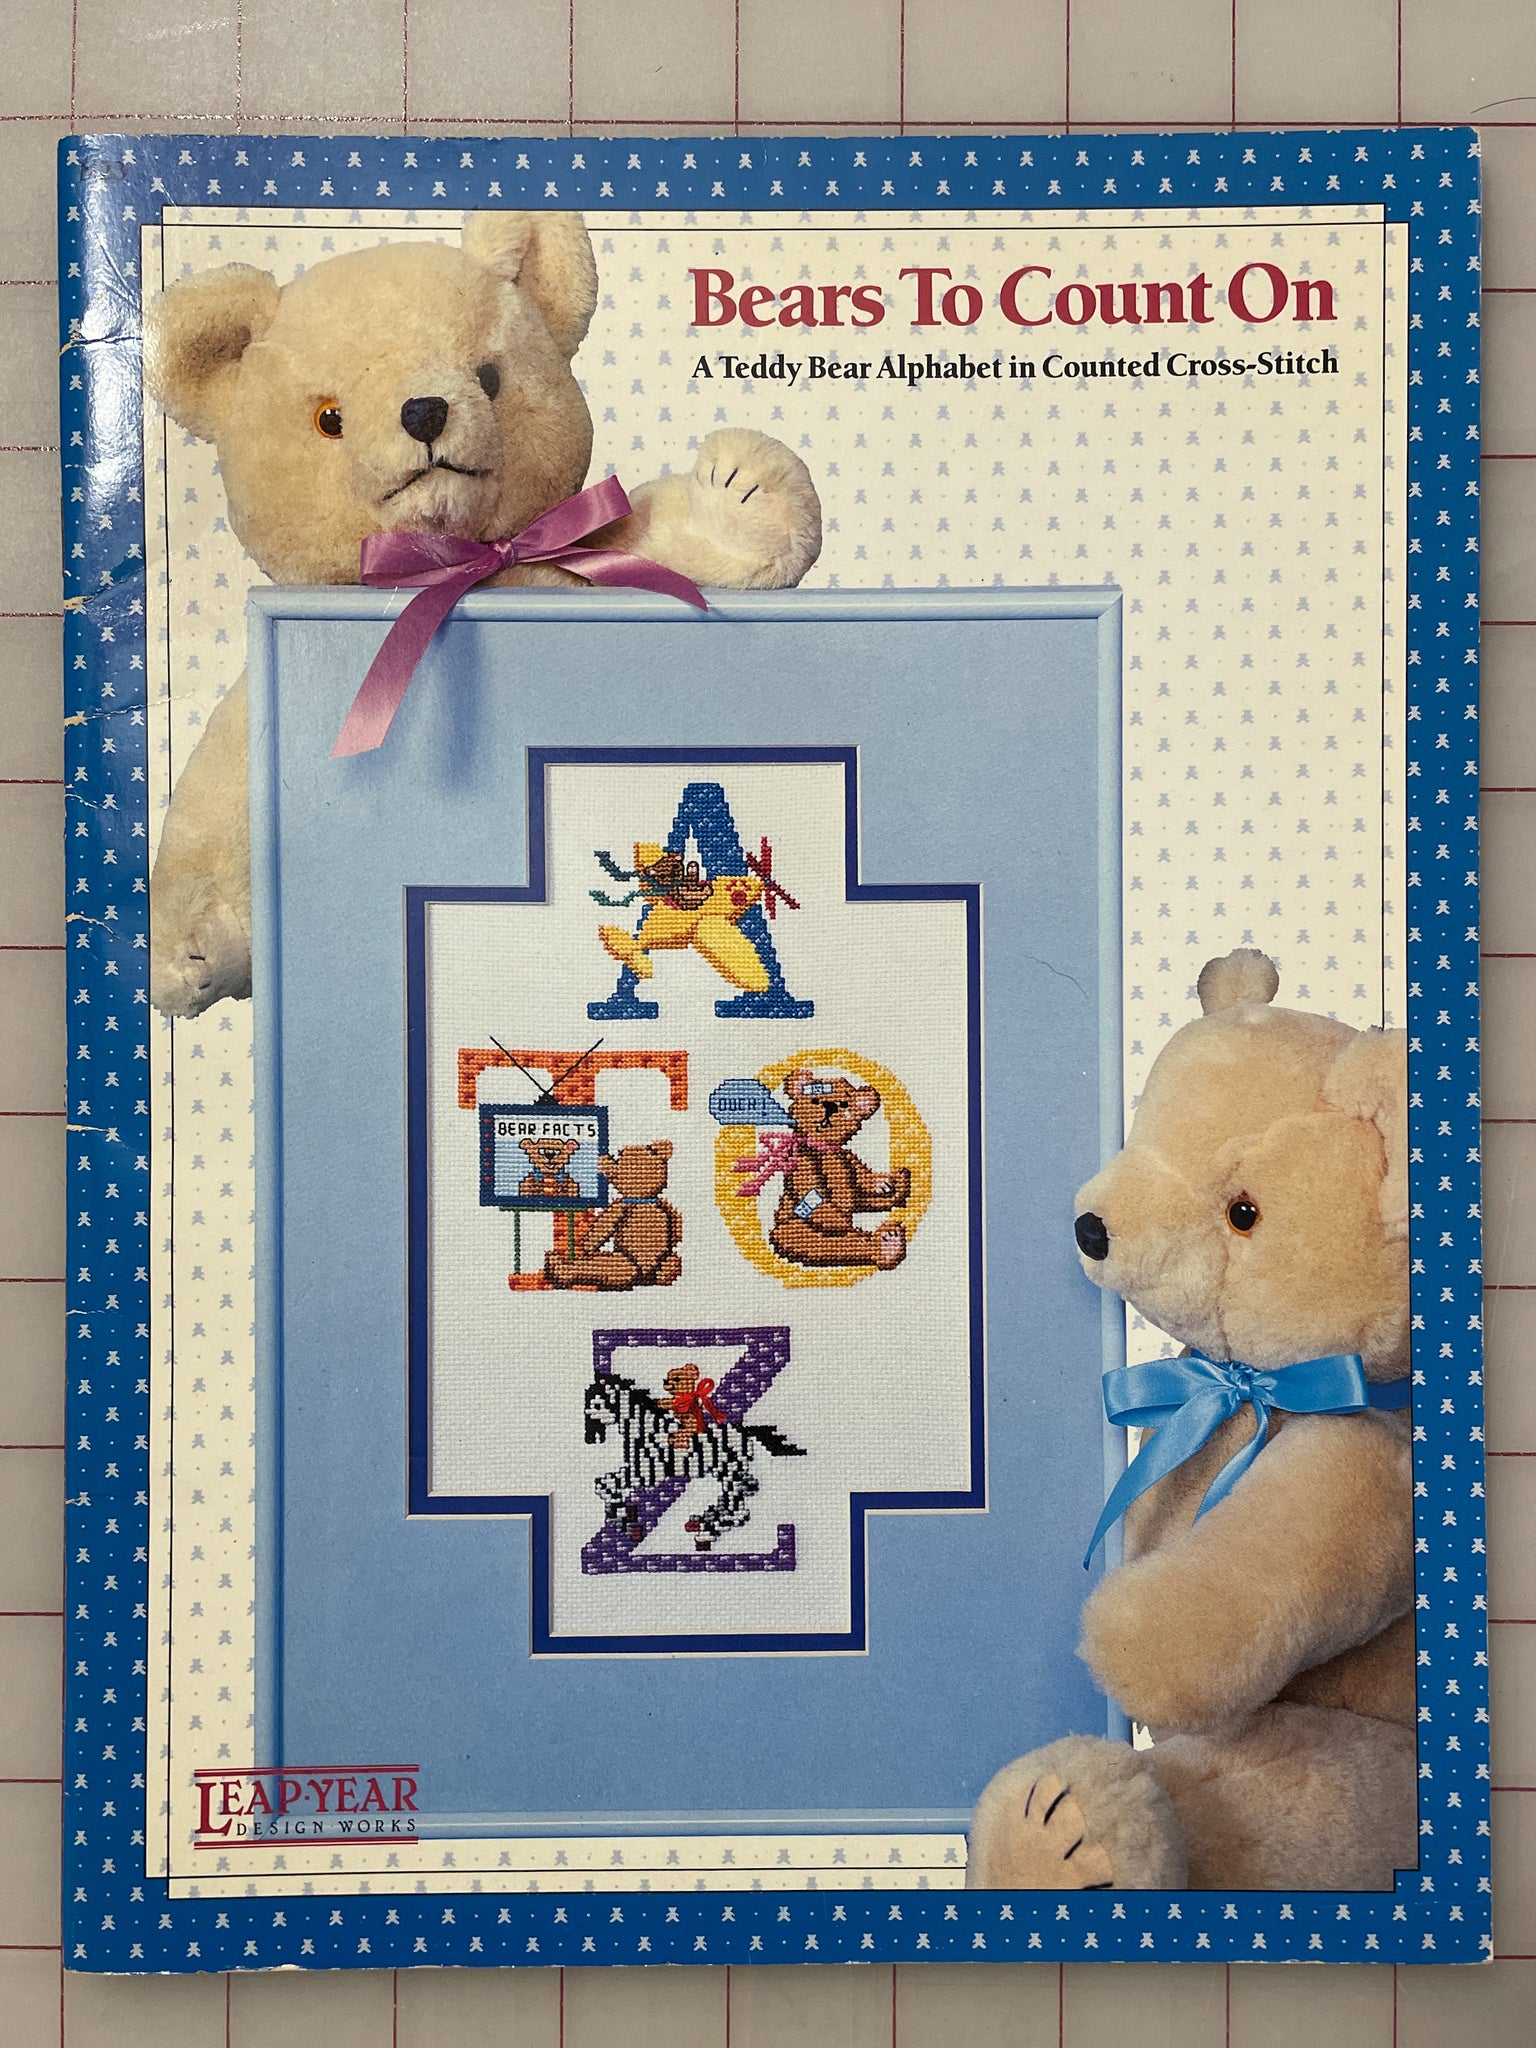 SALE 1983 Cross Stitch Book - "Bears To Count On"